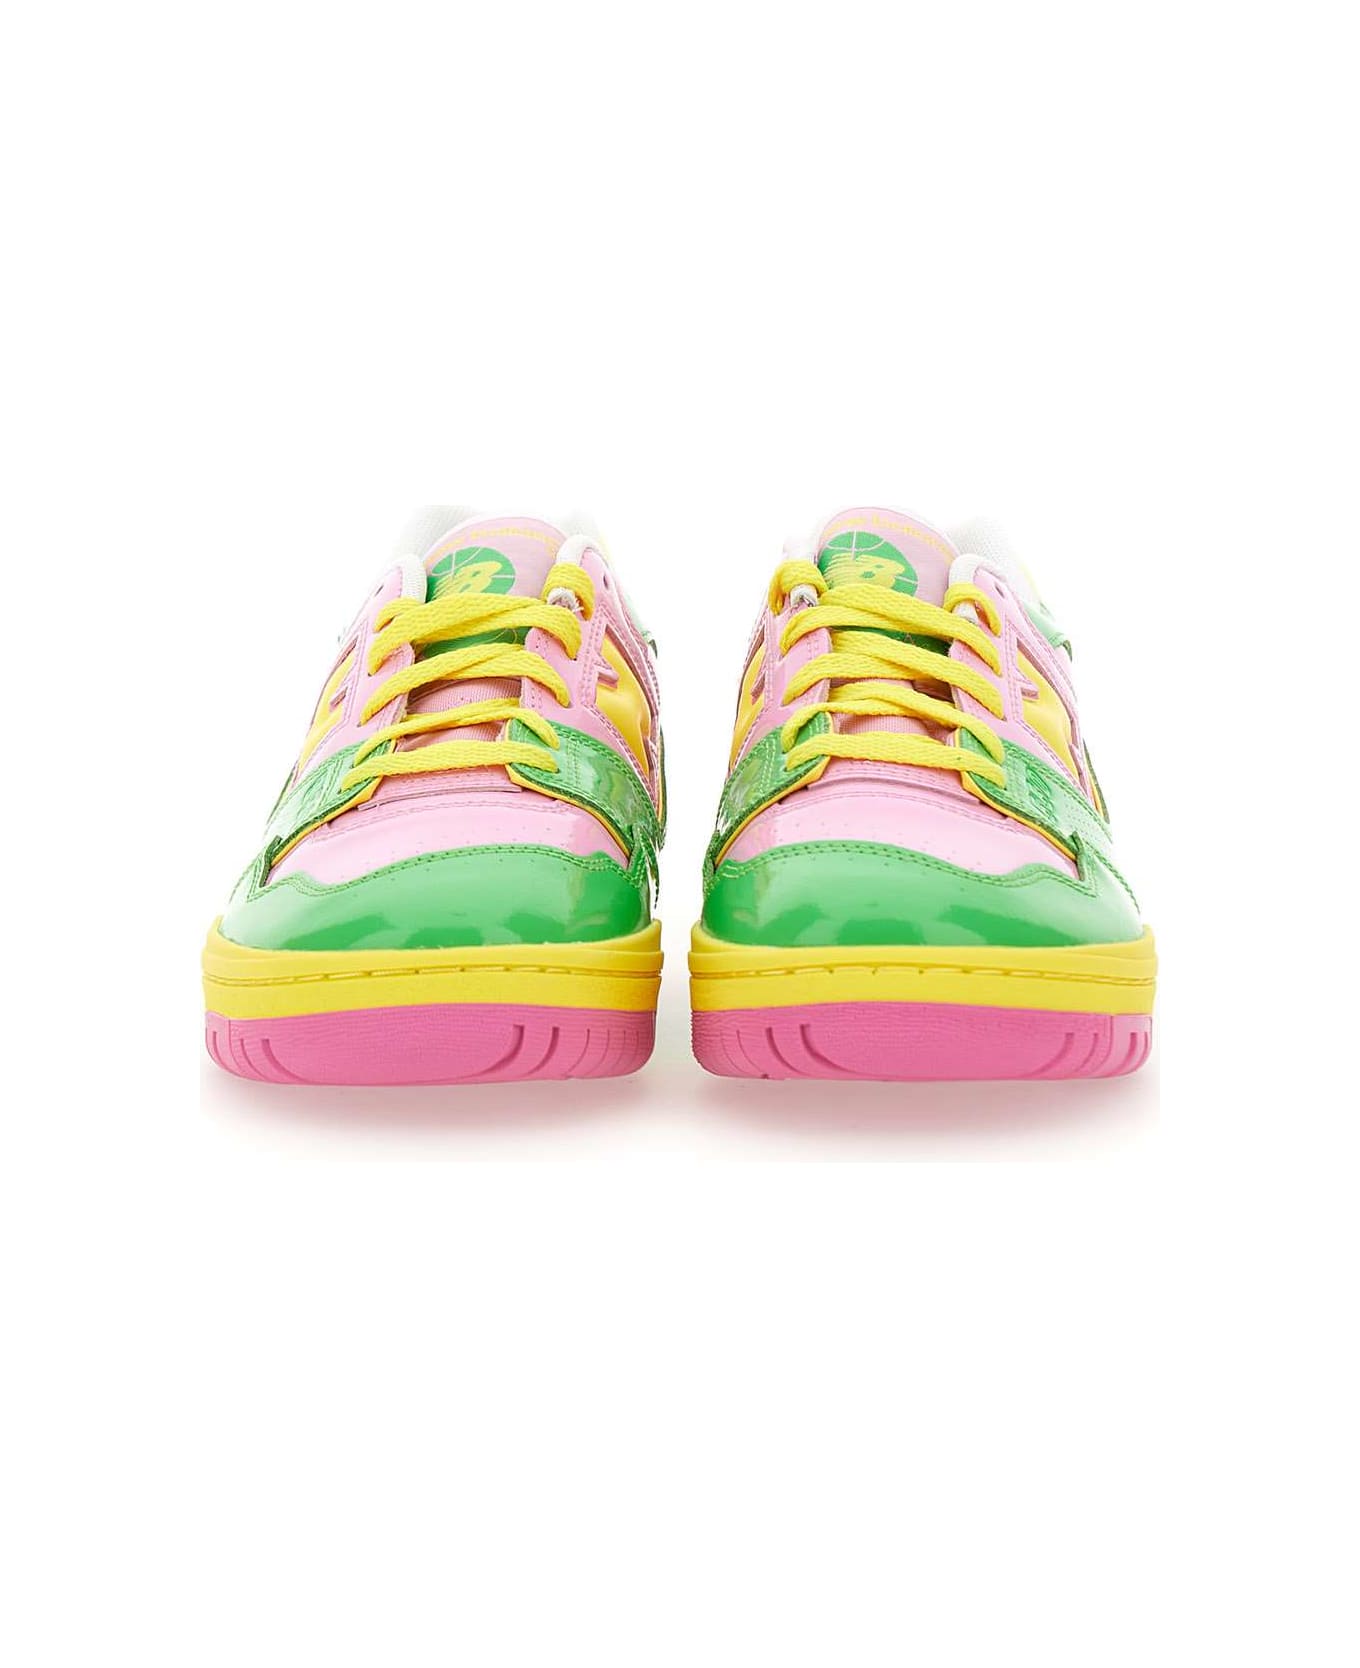 New Balance "bb550" Sneakers - Pink-green-lime スニーカー